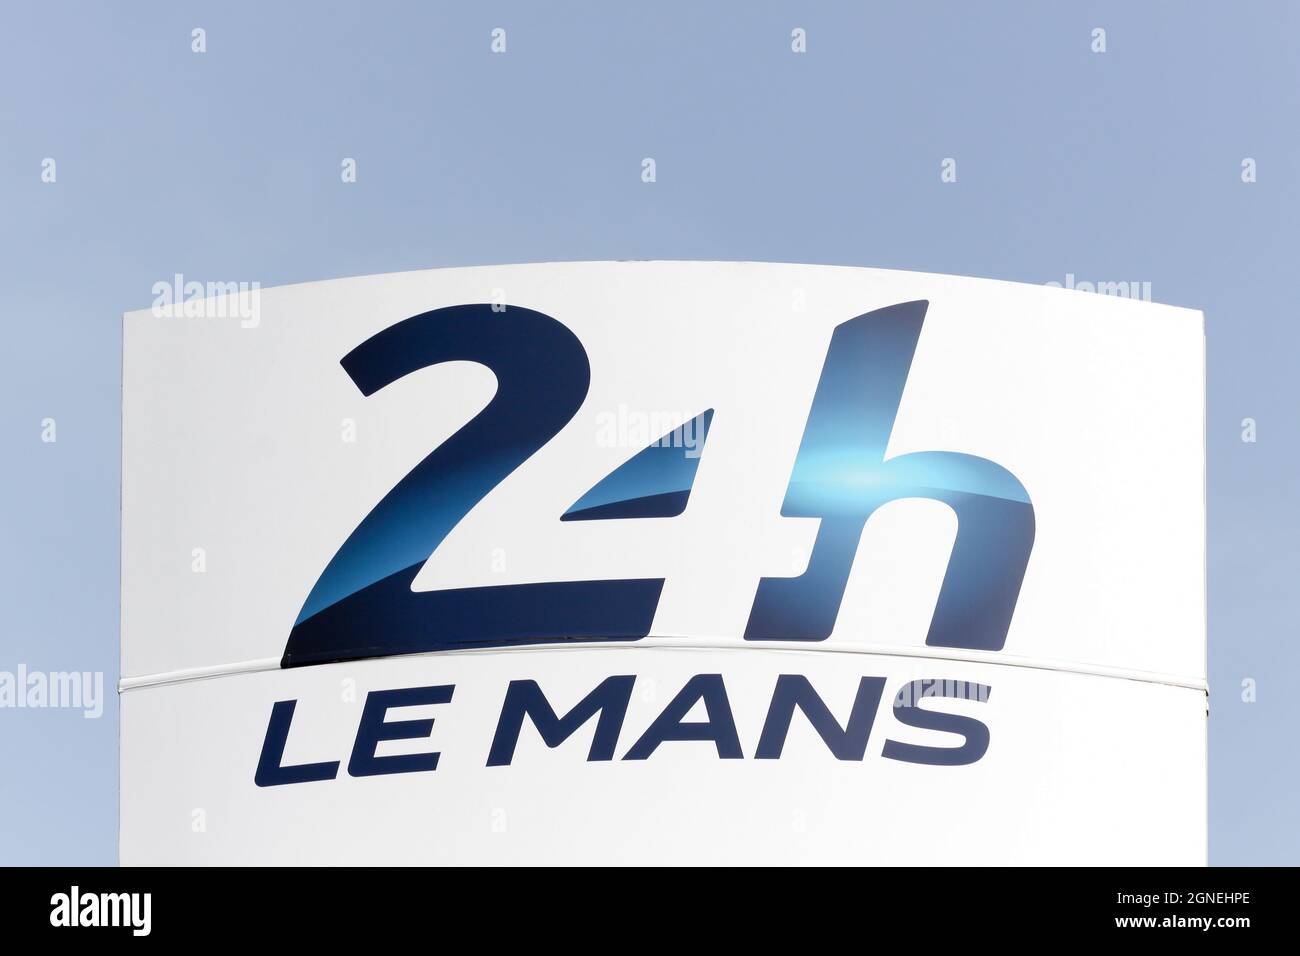 Le Mans, France - March 21, 2015: The 24 Hours of Le Mans logo on a signboard. The 24 Hours of Le Mans is an endurance-focused sports car race Stock Photo